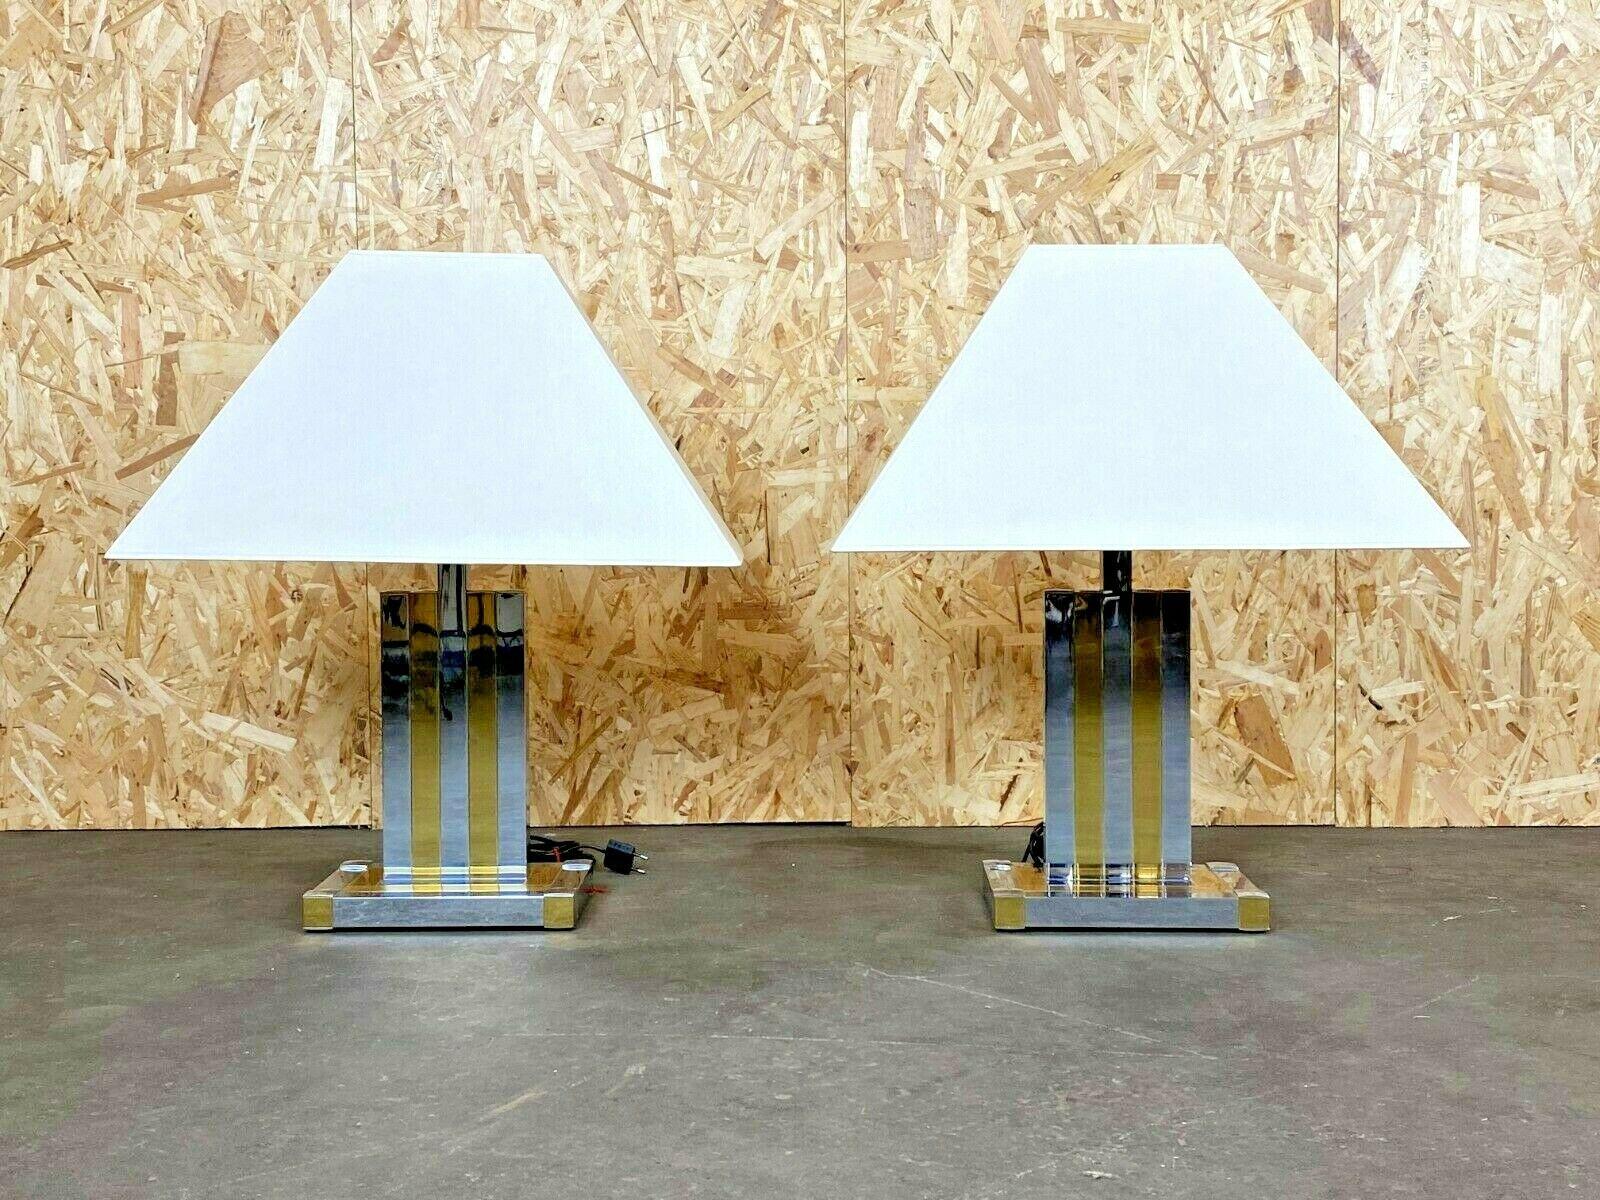 2x 60s 70s Table lamp table lamp for Lumica Braas & Chrome

Object: 2x table lamp

Manufacturer: Lumica

Condition: good

Age: around 1960-1970

Dimensions:

60.5cm x 36cm x 69cm

Other notes:

The pictures serve as part of the